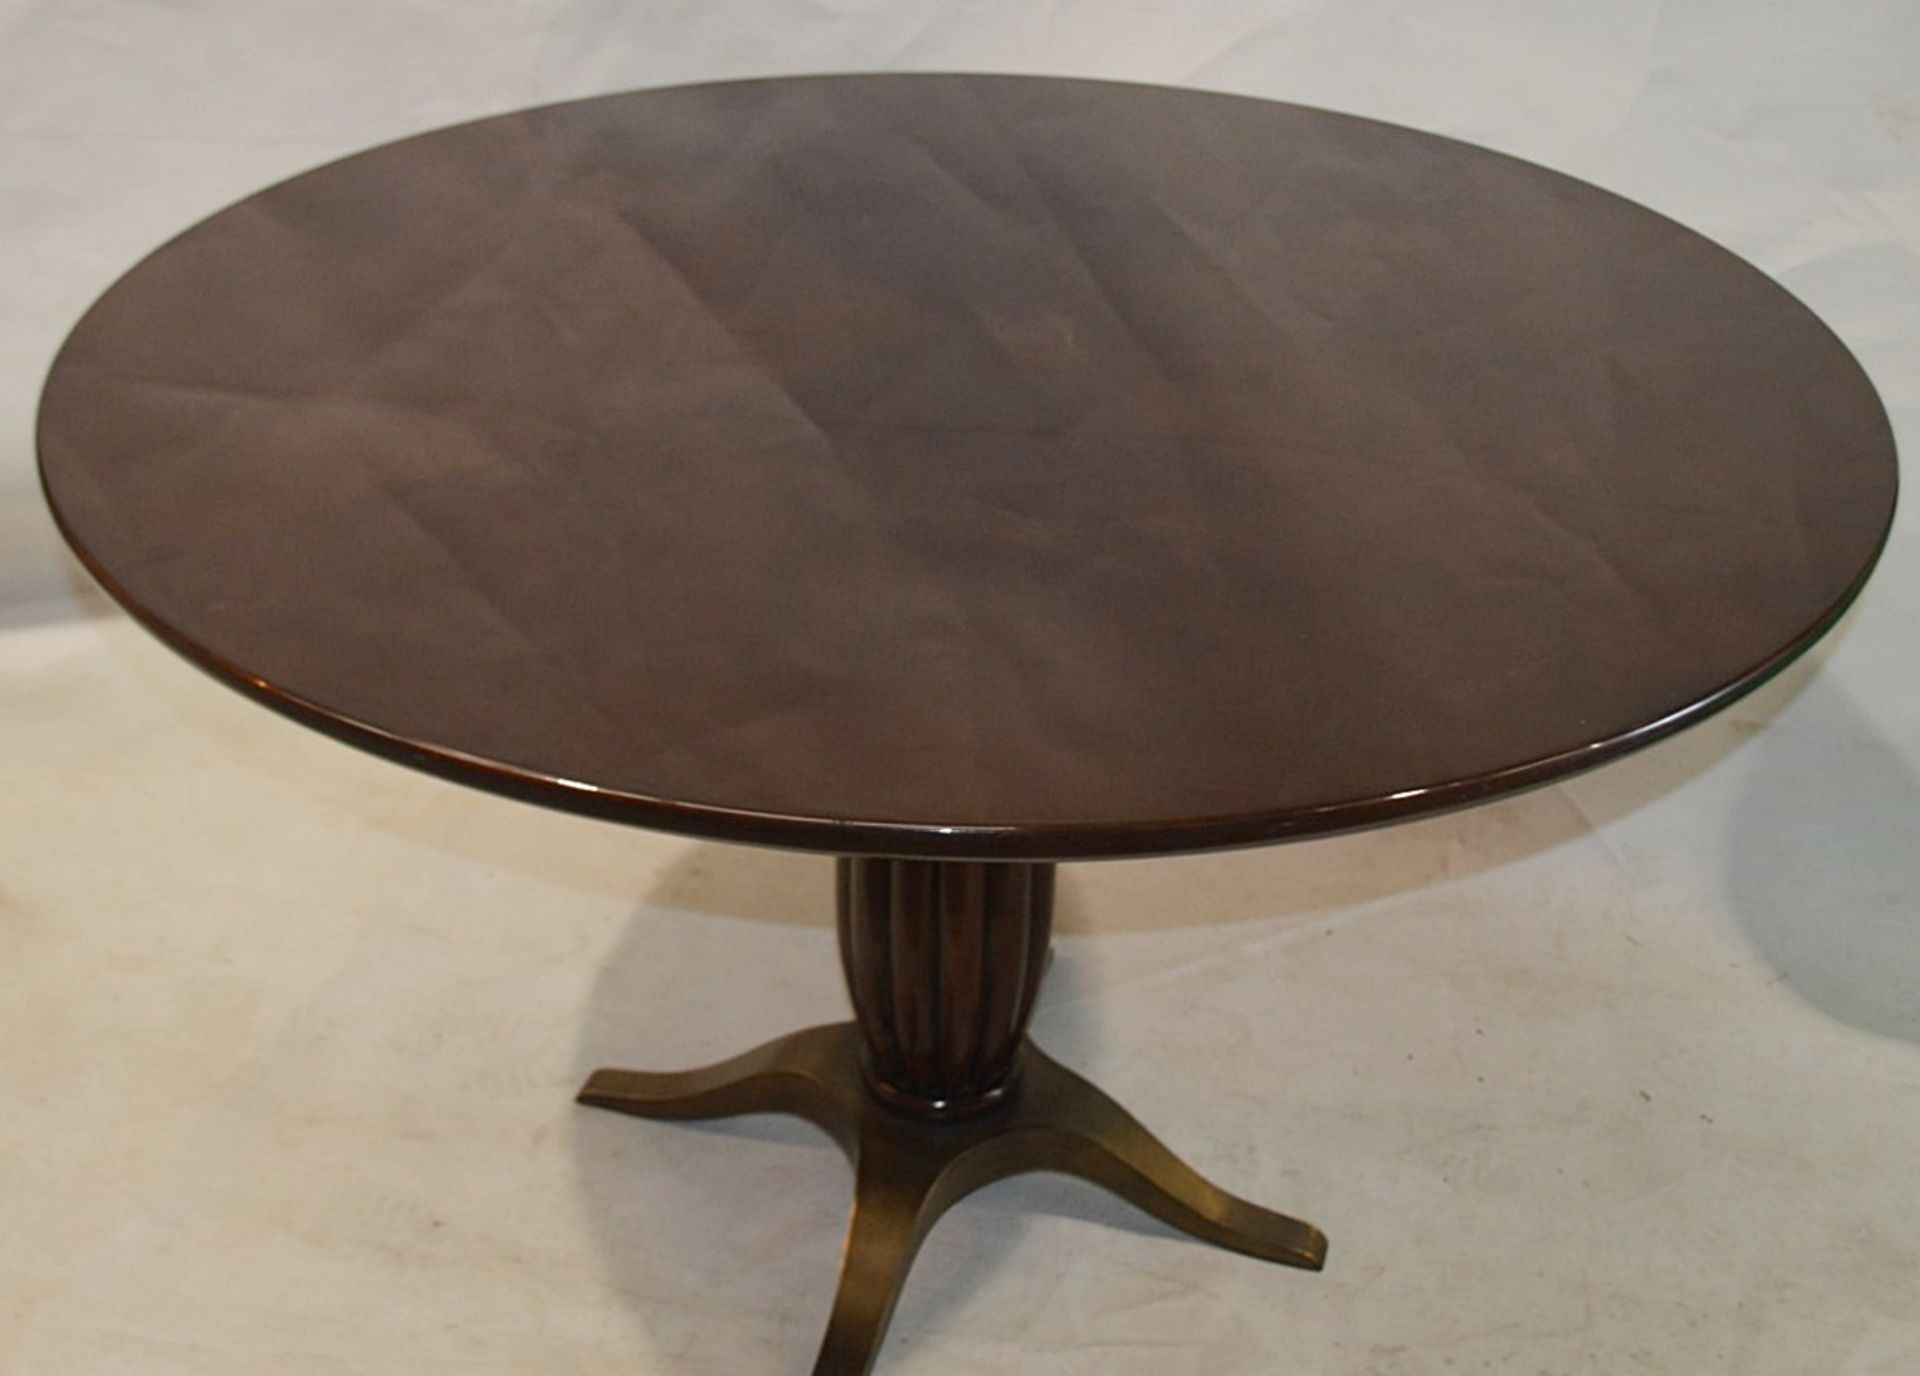 1 x Christopher Guy 'Toulouse' Round Georgian-Style Restaurant Dining Table - Original RRP £4,600.00 - Image 8 of 9